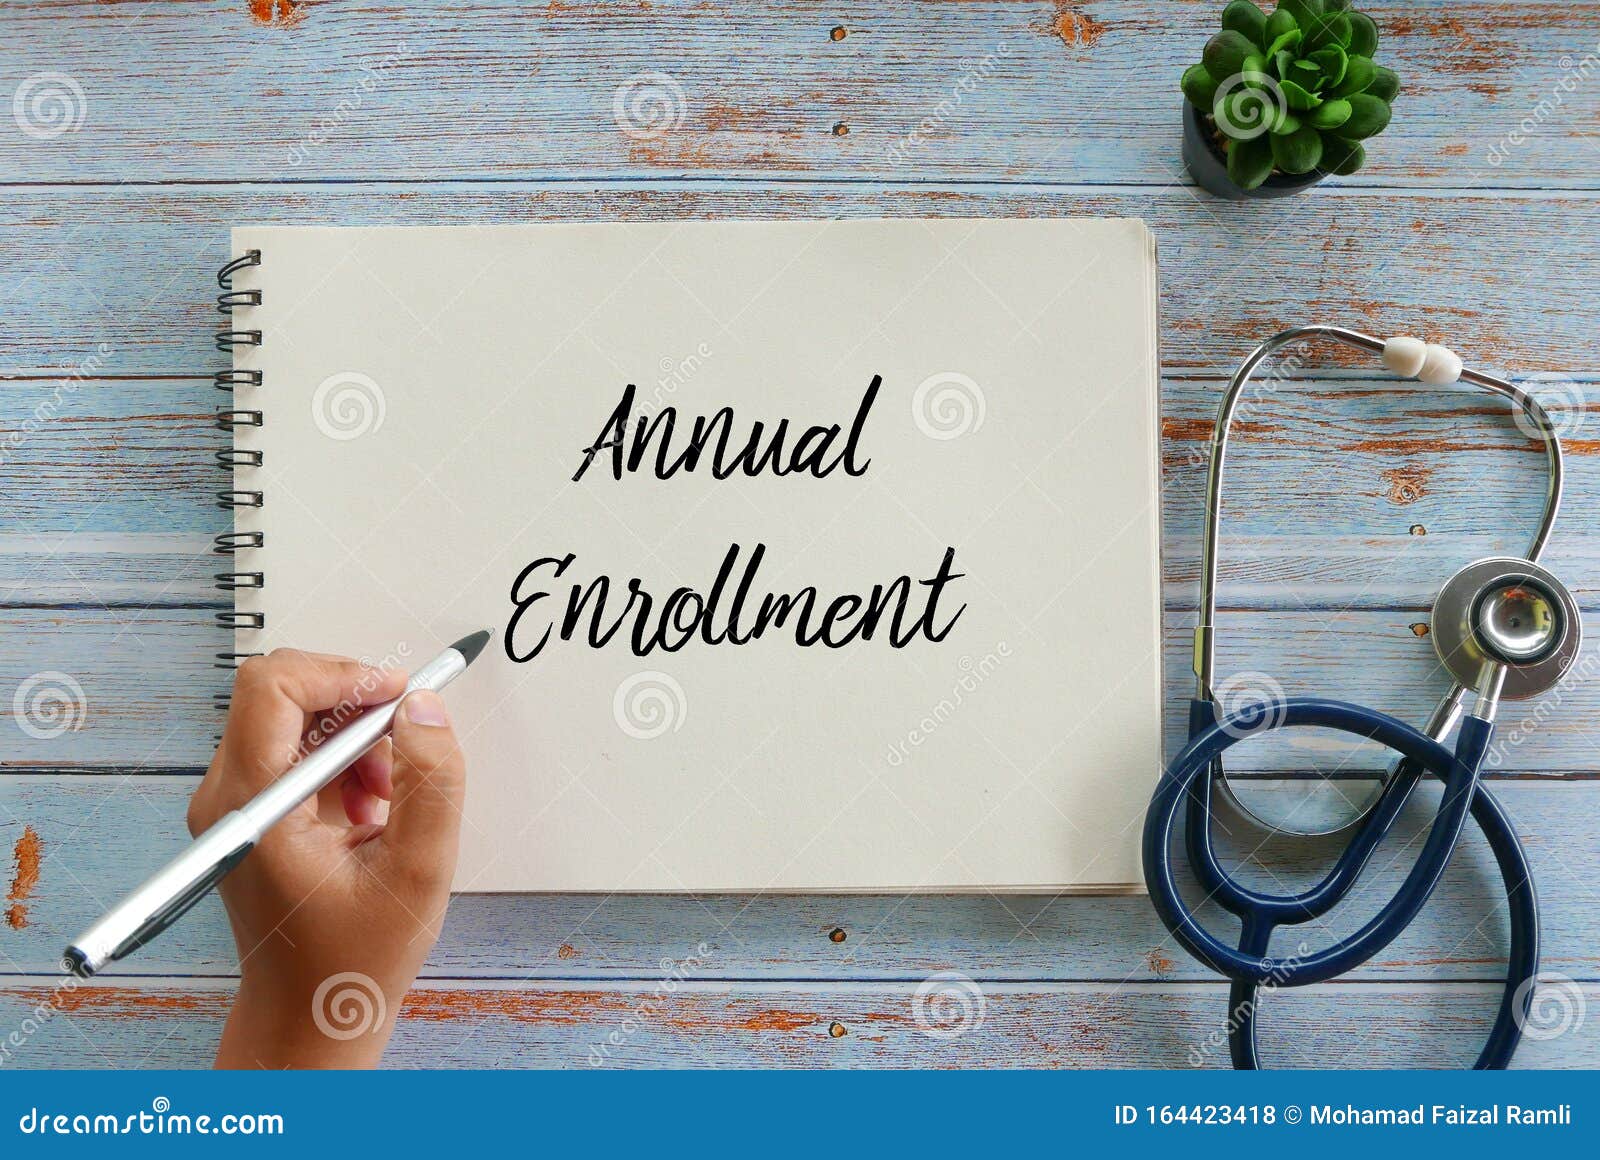 top view of plant,stethoscope, and hand writing annual enrollment on notebook on wooden background